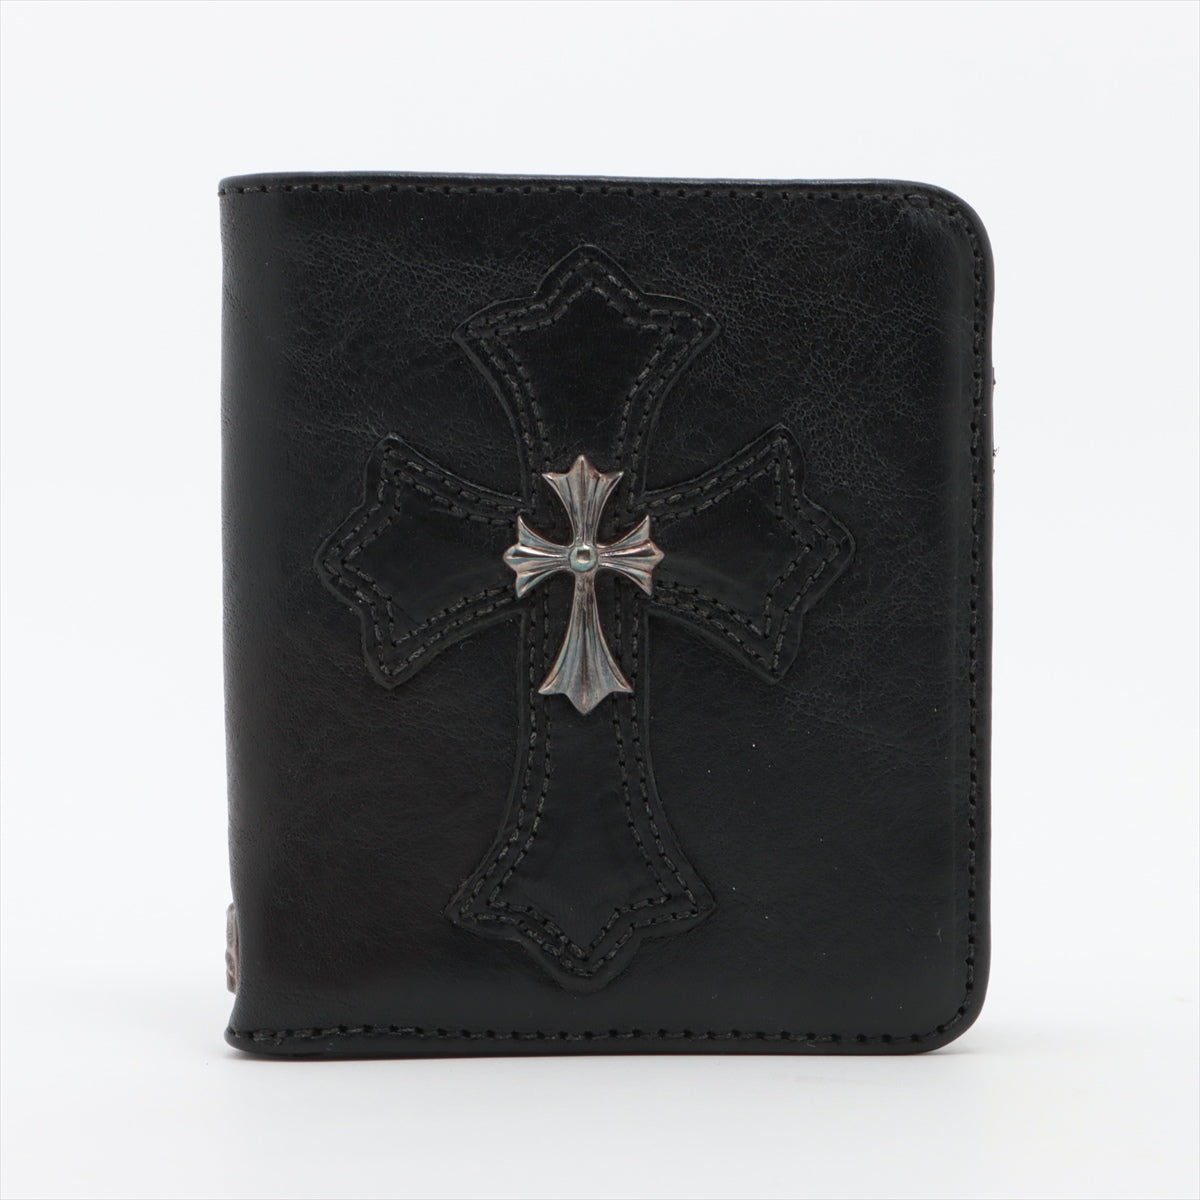 Chrome Hearts Wallet Unknown material Black × Silver DiGiacomo Cross Patch with tiny CH cross